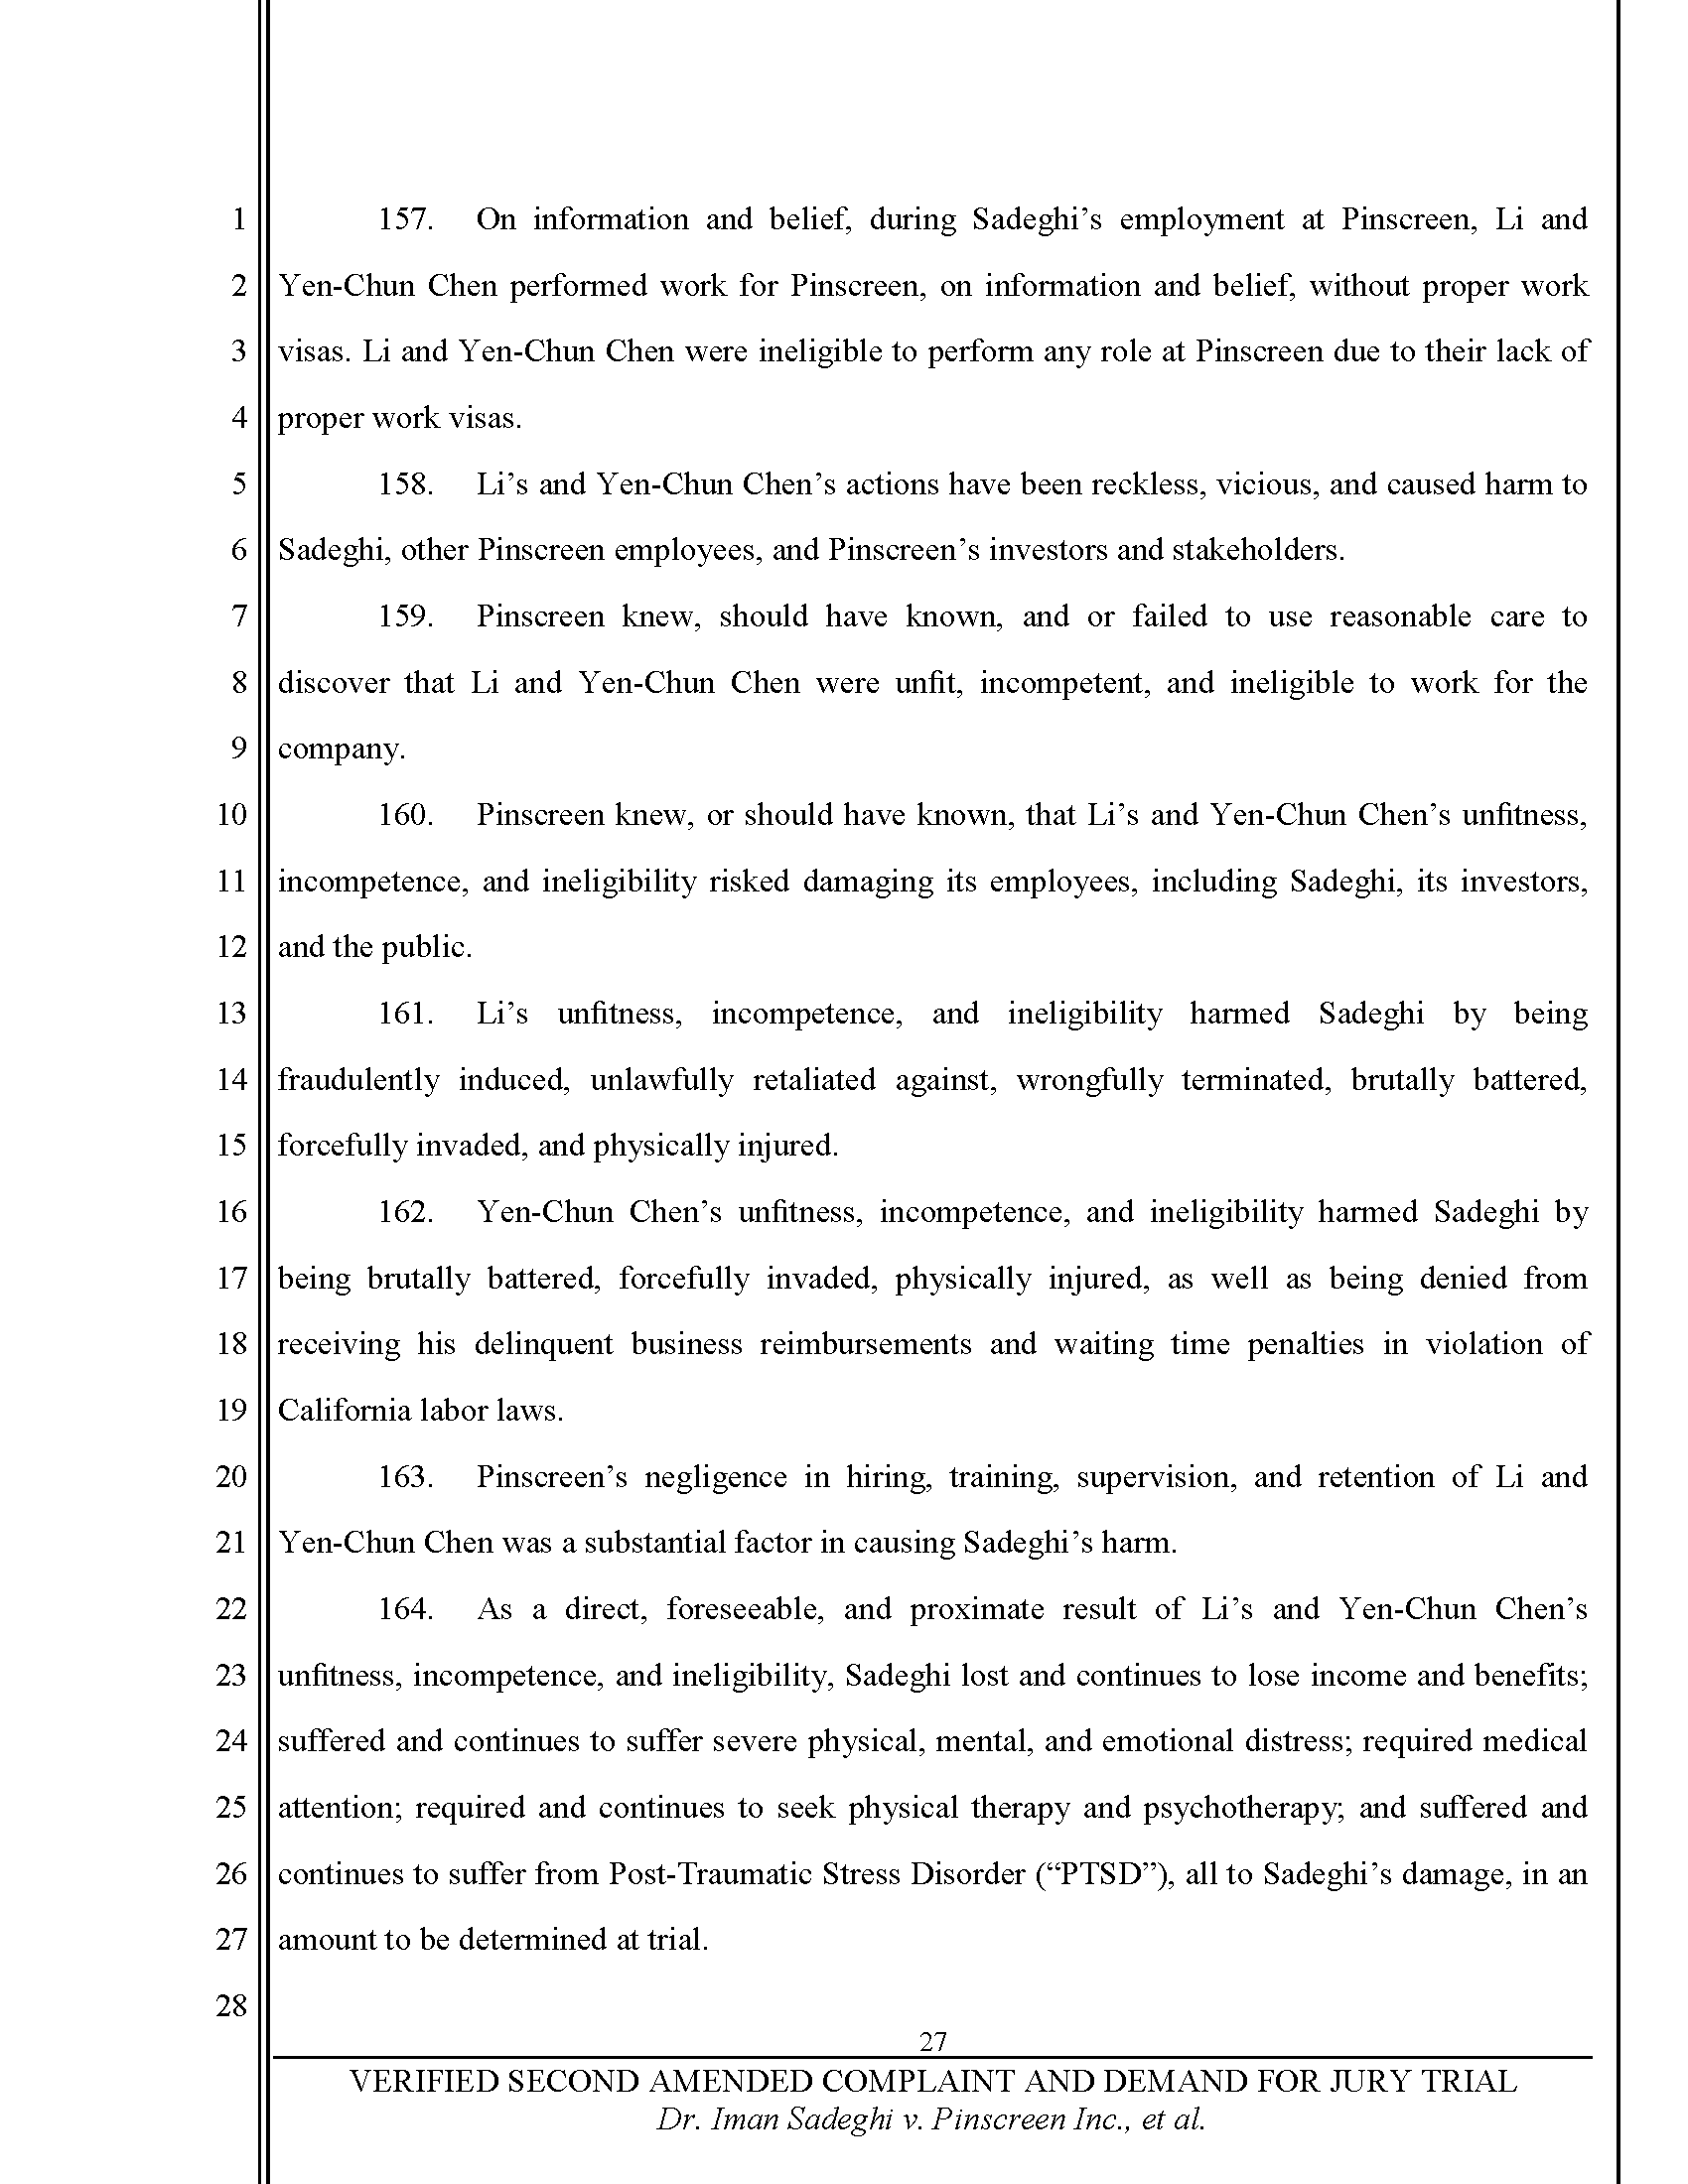 Second Amended Complaint (SAC) Page 28